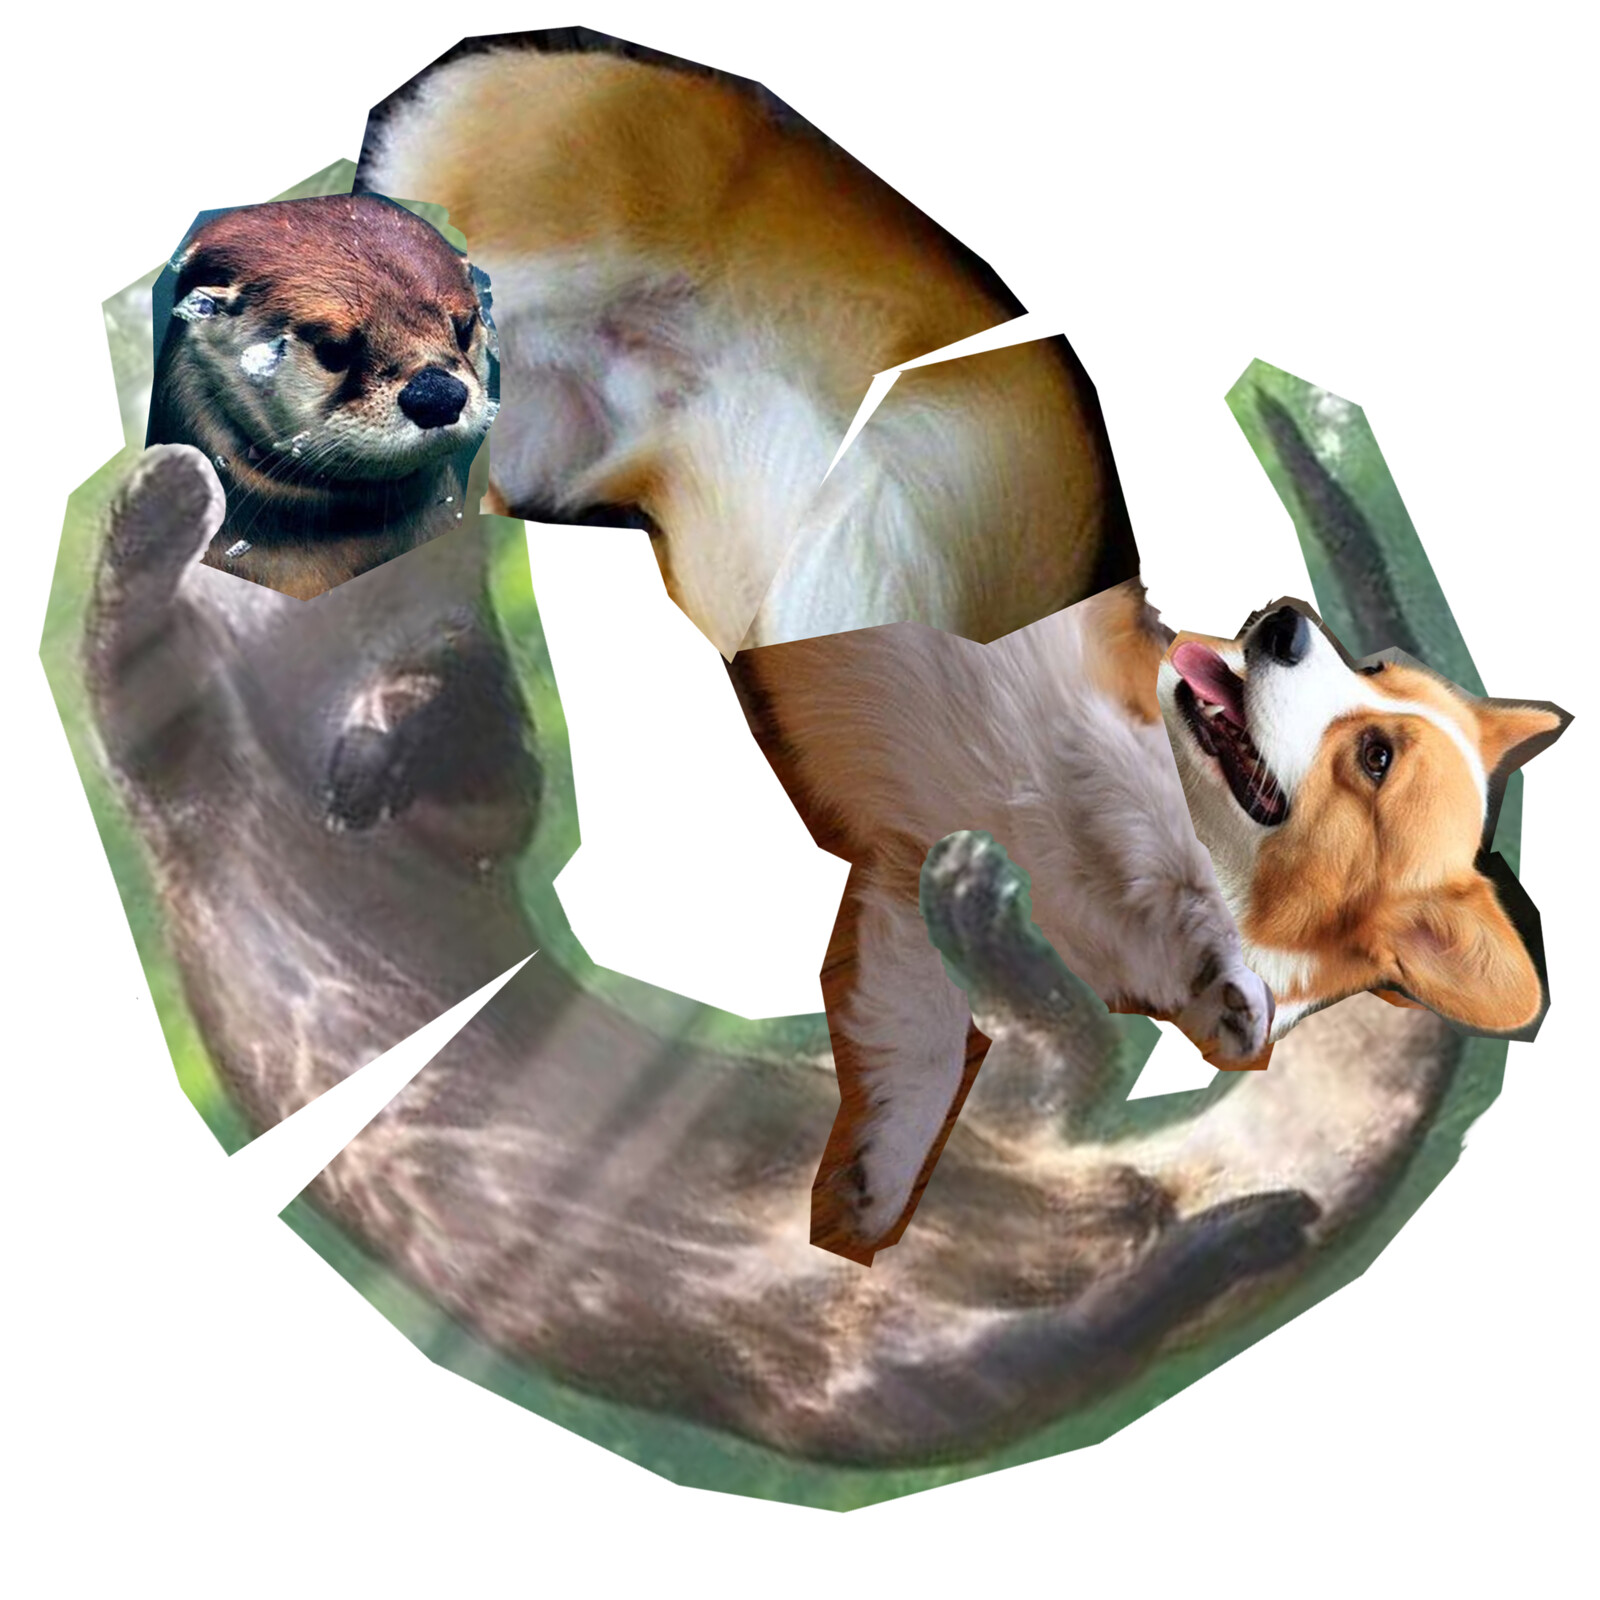 I photo-bashed several images of river otters and corgi's together for reference. This helped me stay true to their anatomy while posing them.